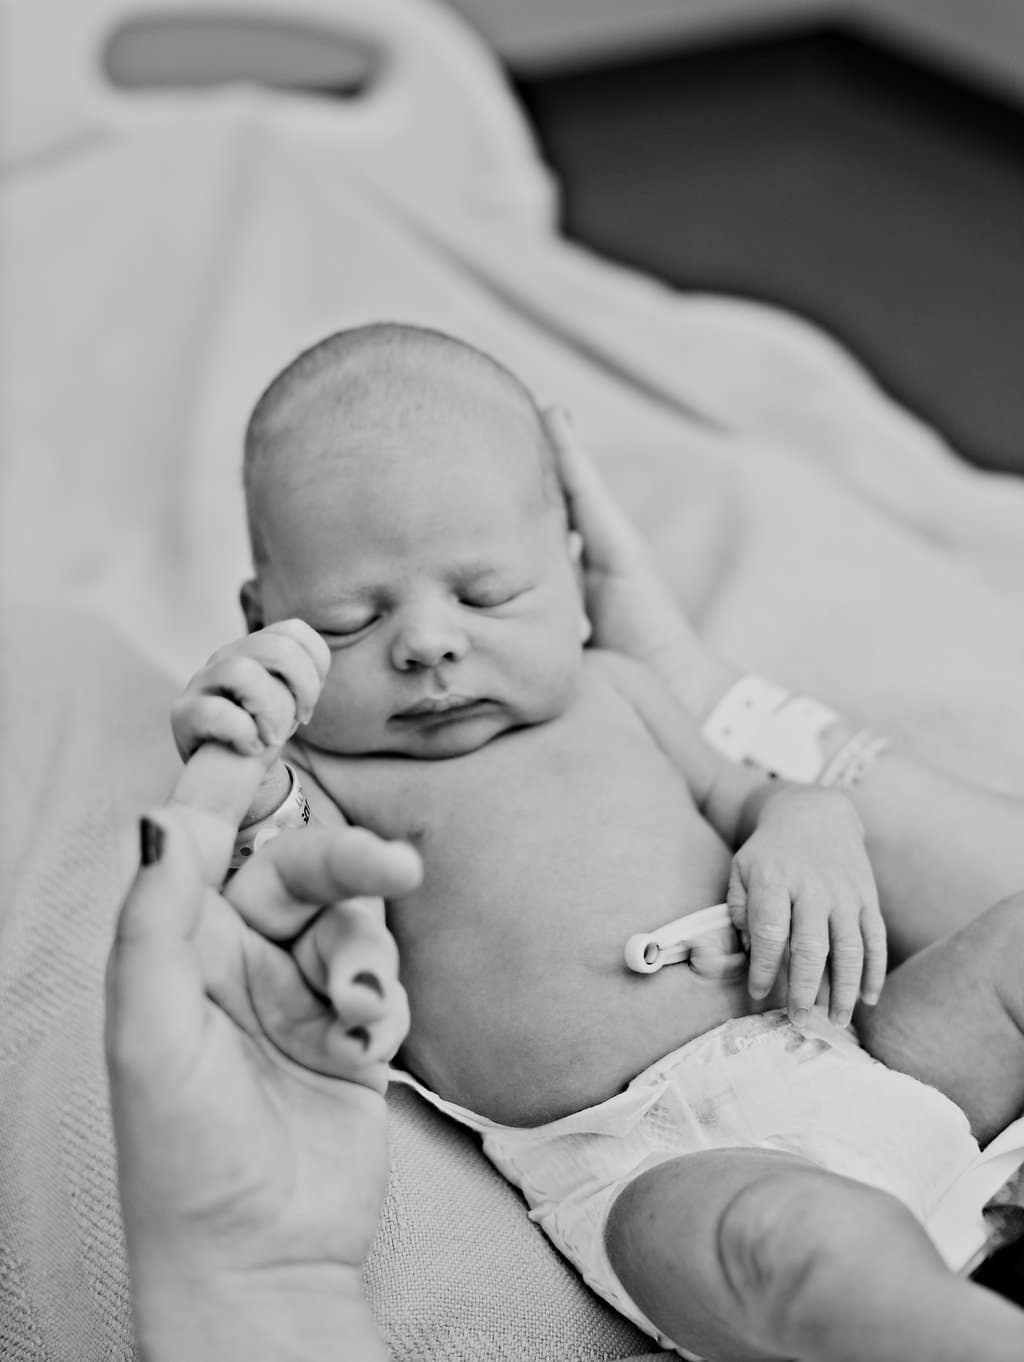 A Birth Story in Photos show newborn baby with freshly cut umbilical cord. 